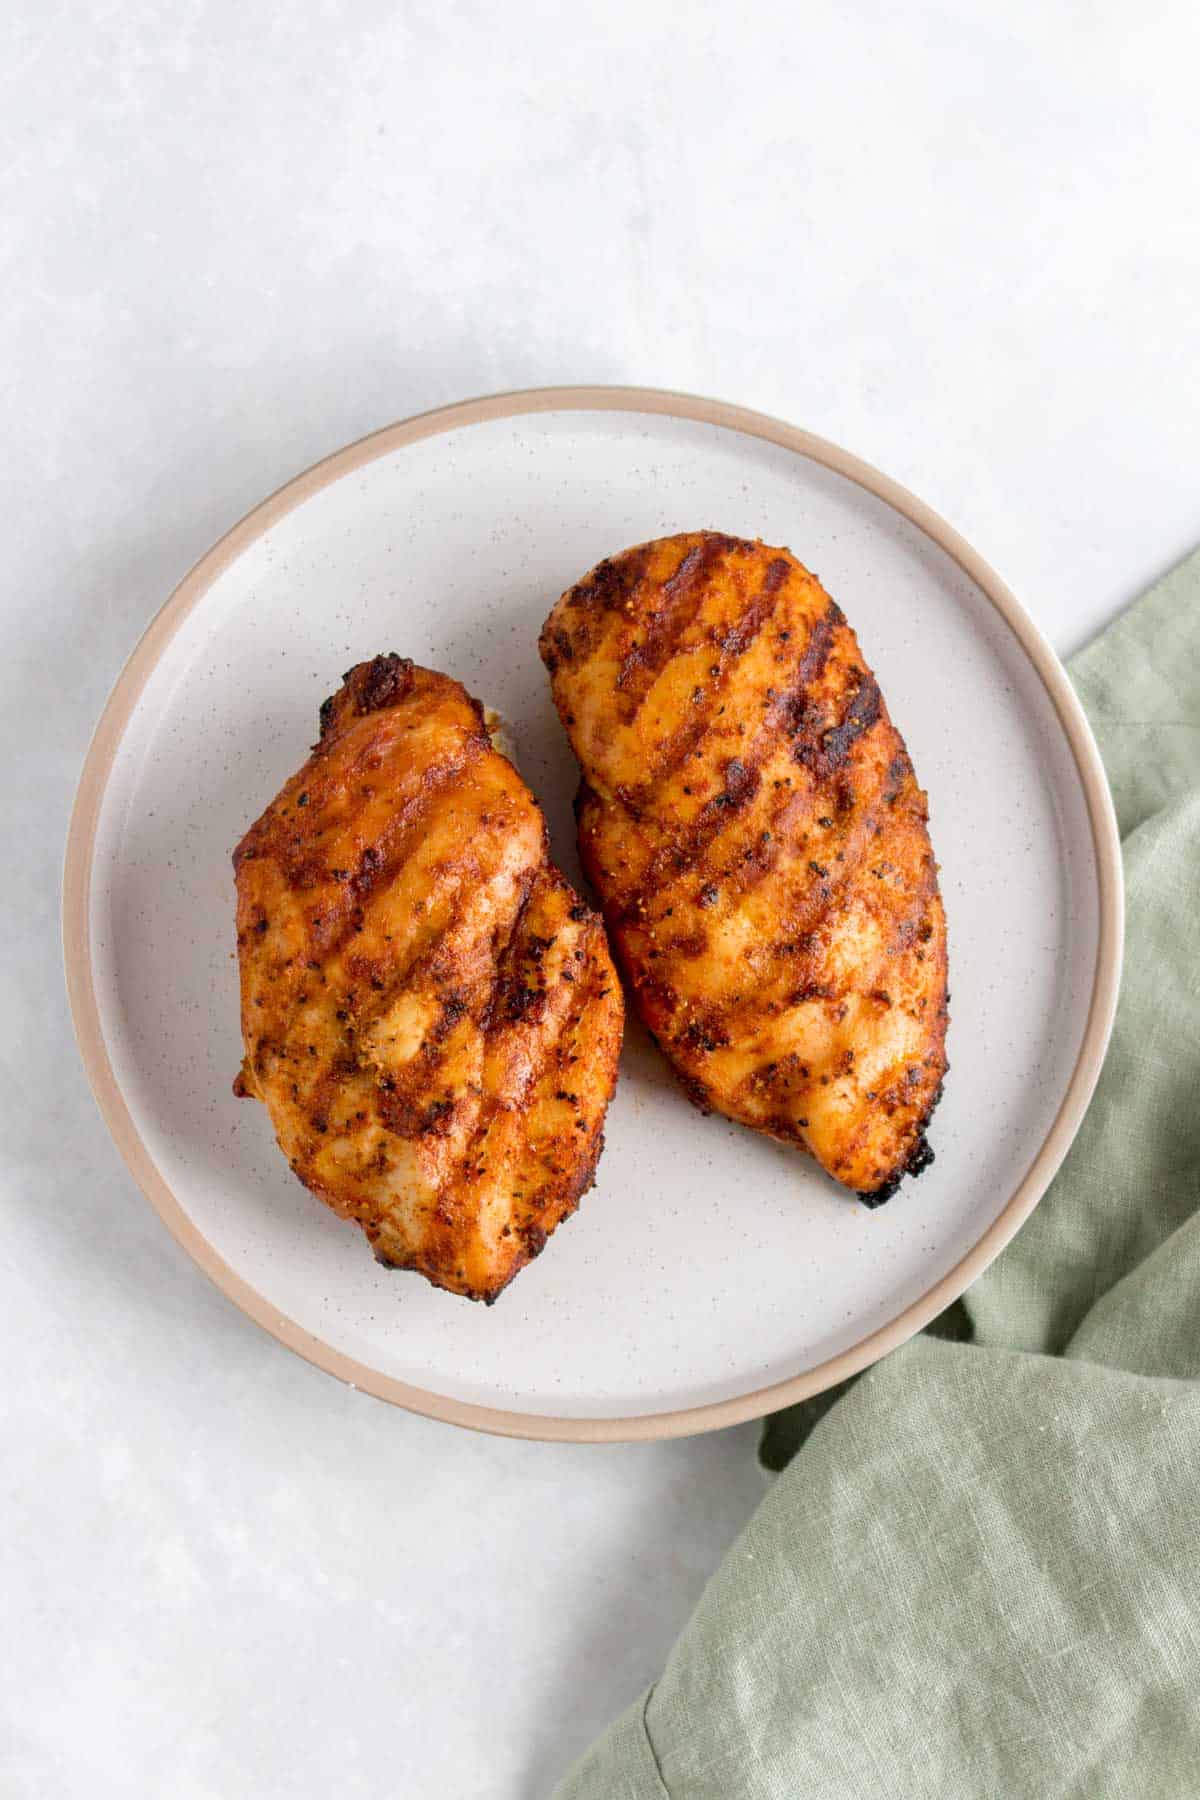 Two grilled chicken breasts on a plate.